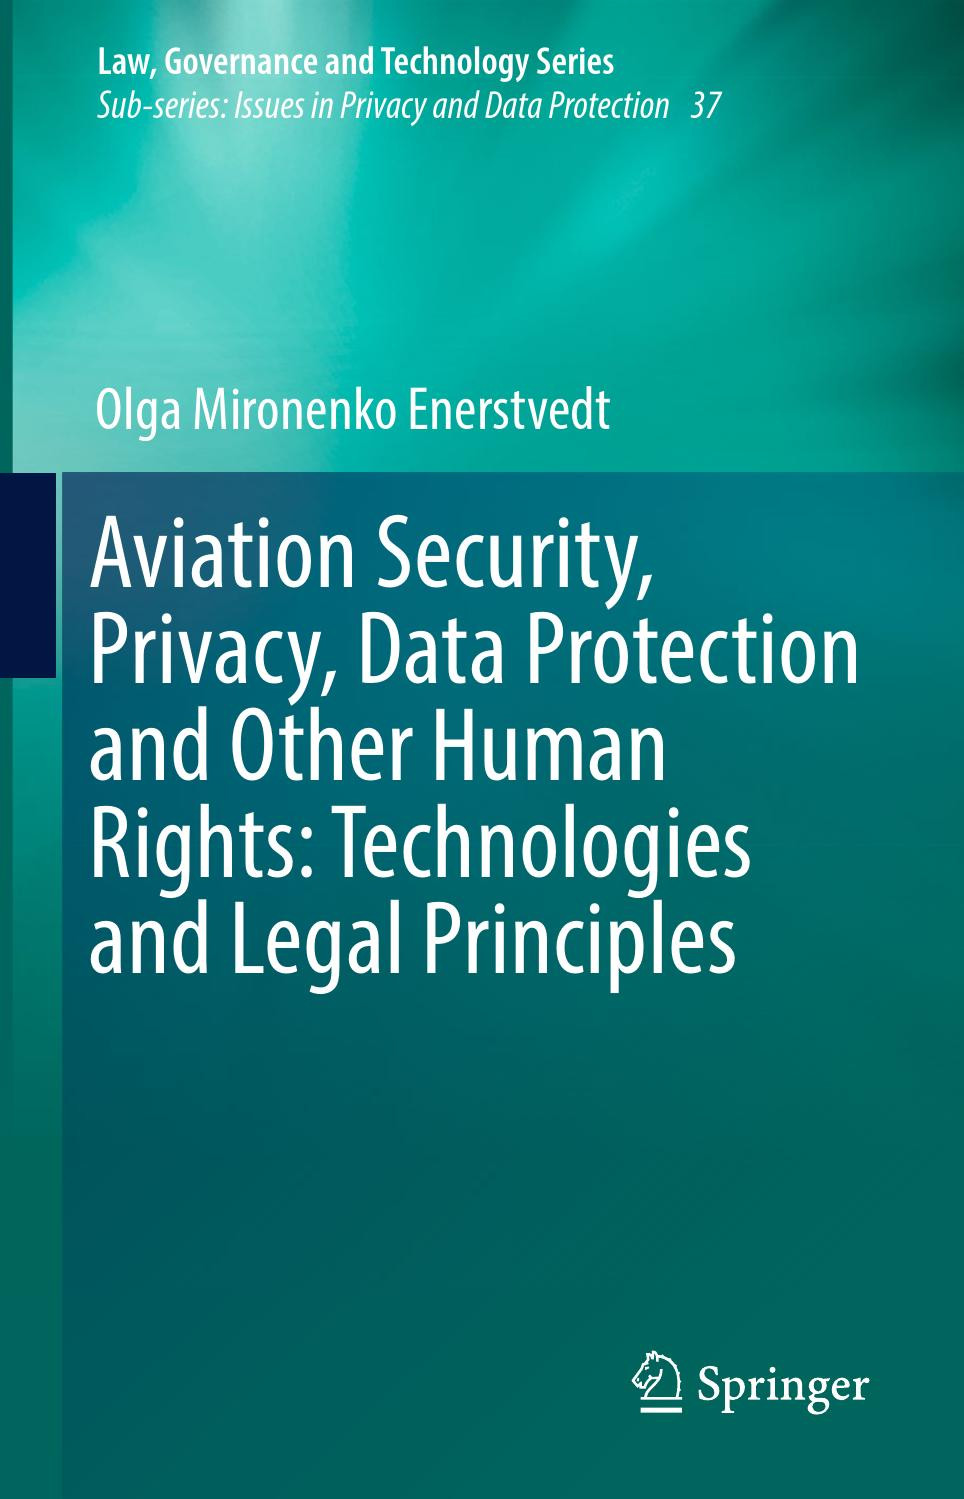 Sample Resume for Tsa Airport Security by Prior Law Enforcement Aviation Security Privacy, Data Protection and Other Human Rights …